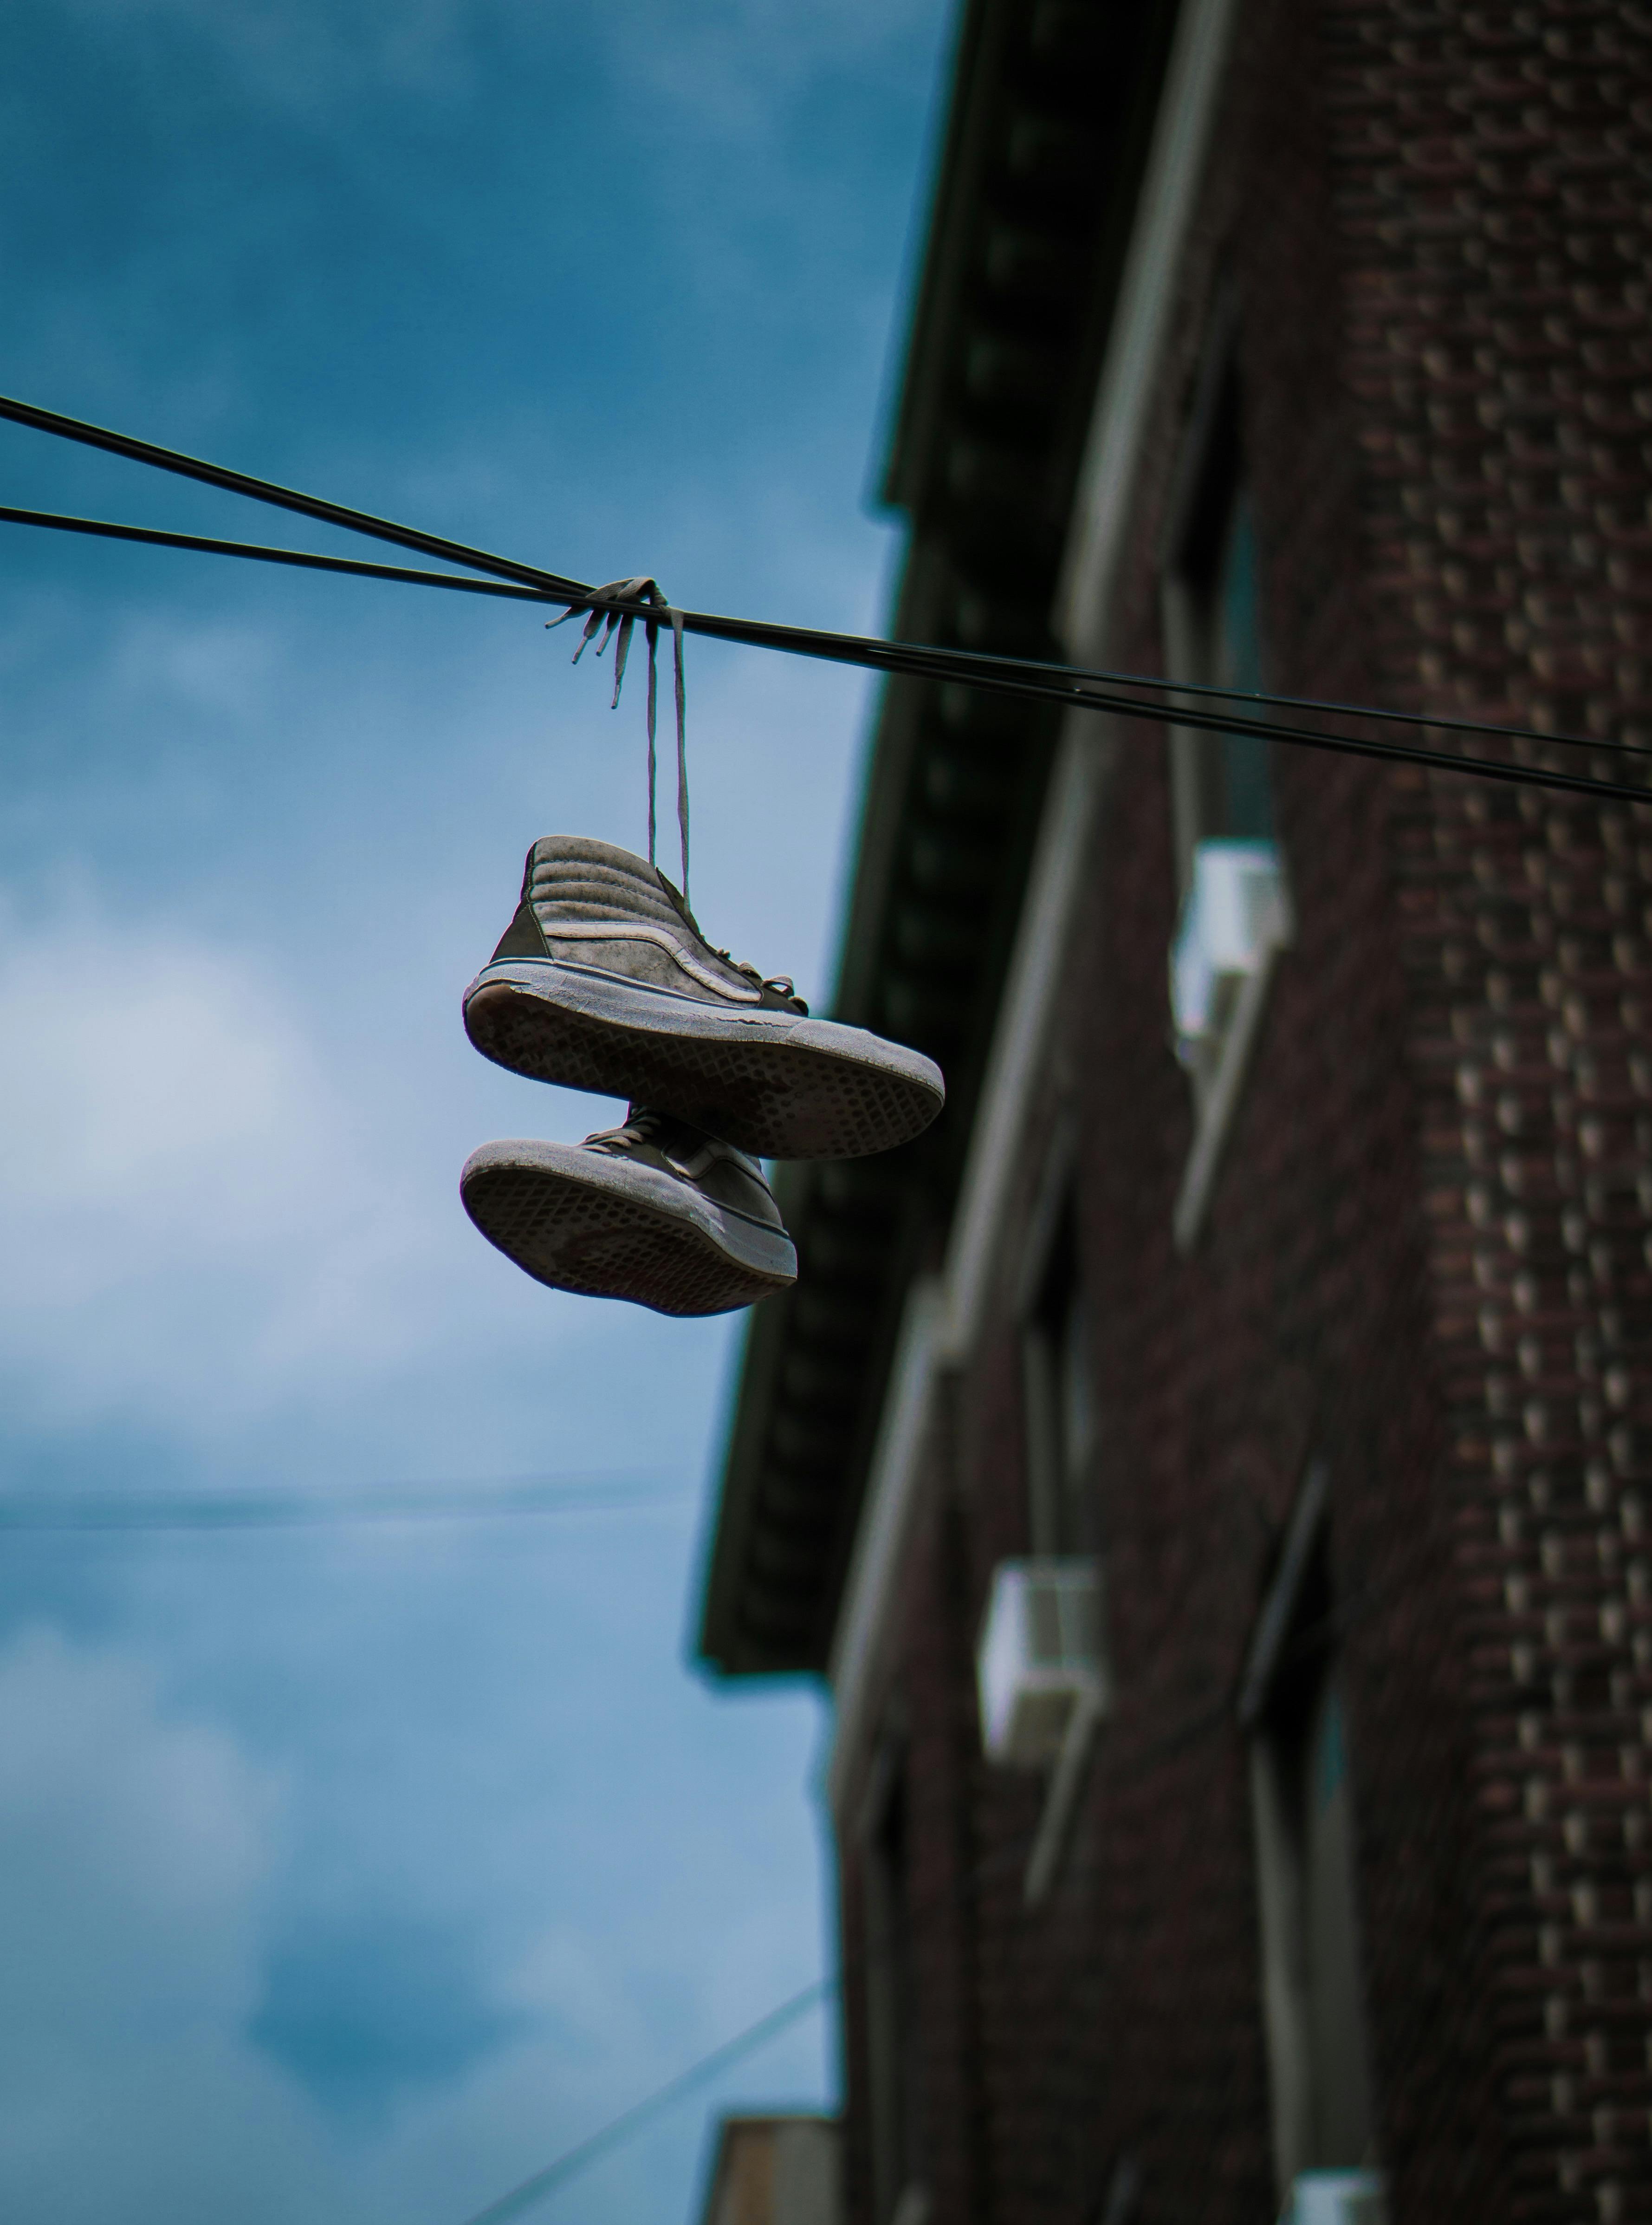 Shoes on cables and wires stock photo. Image of throwing - 24894444